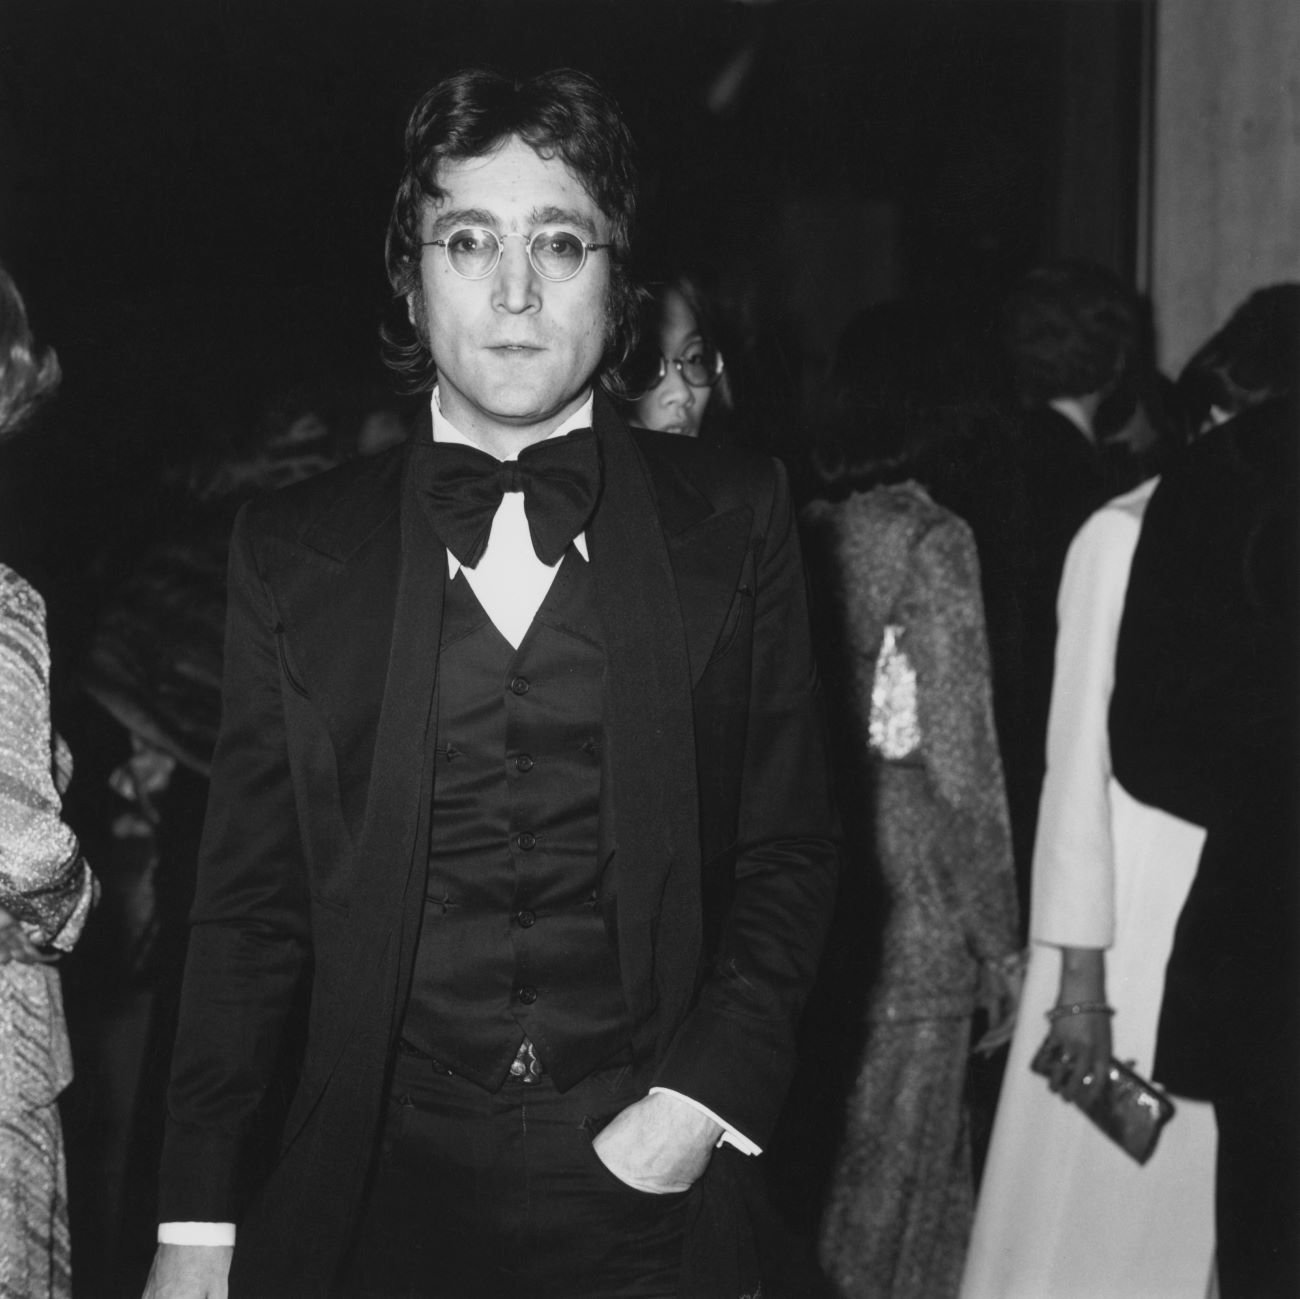 John Lennon wears a suit and stands with one hand in his pocket.